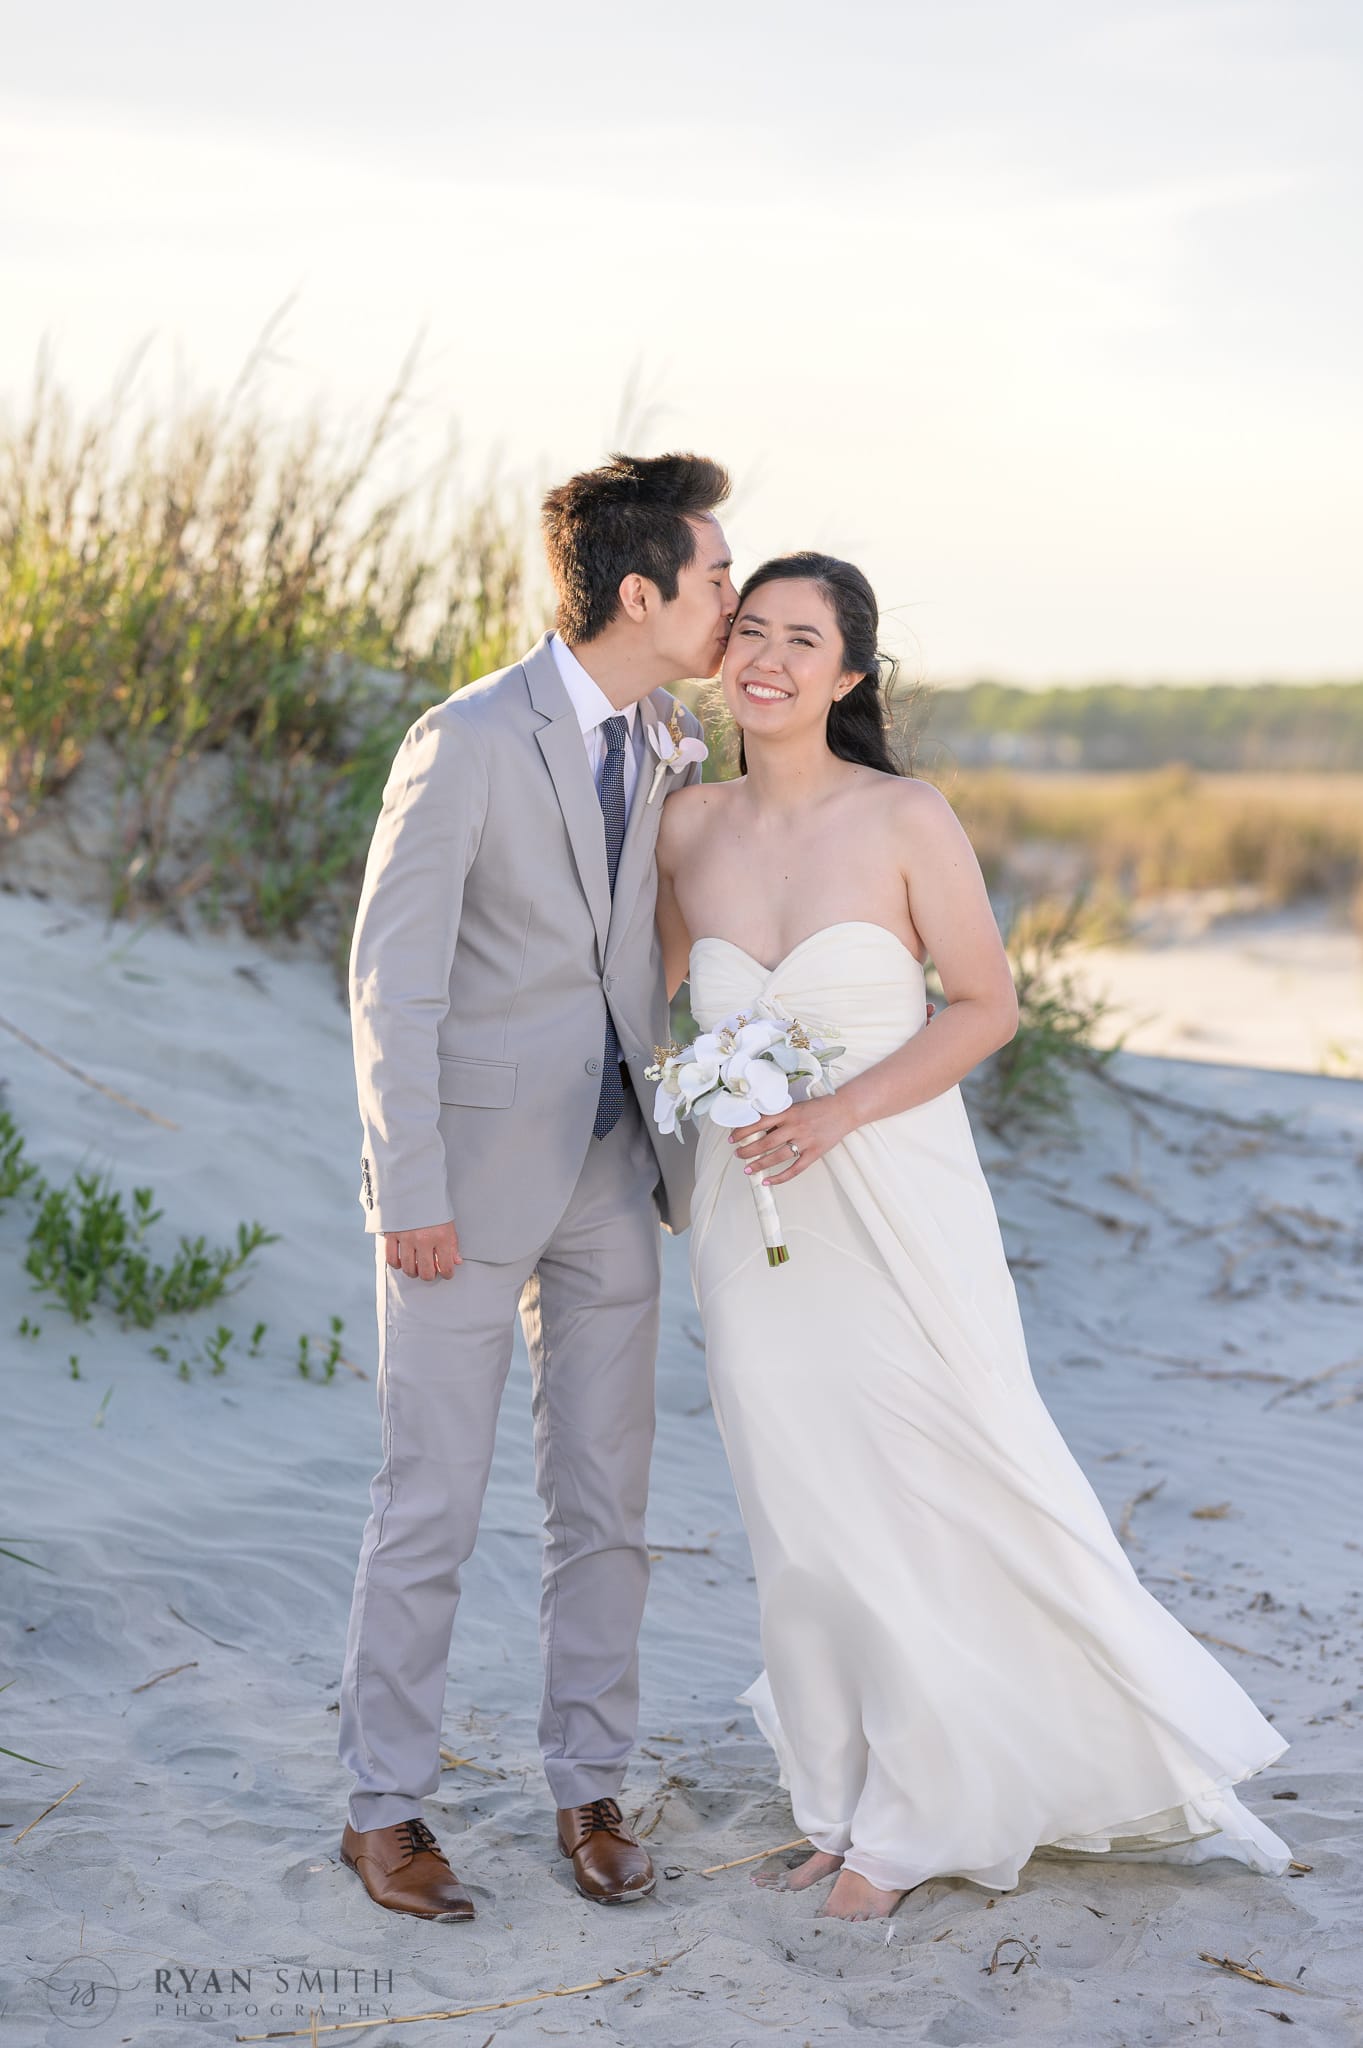 Kiss on the cheek from bride's brother - Cherry Grove Point - North Myrtle Beach